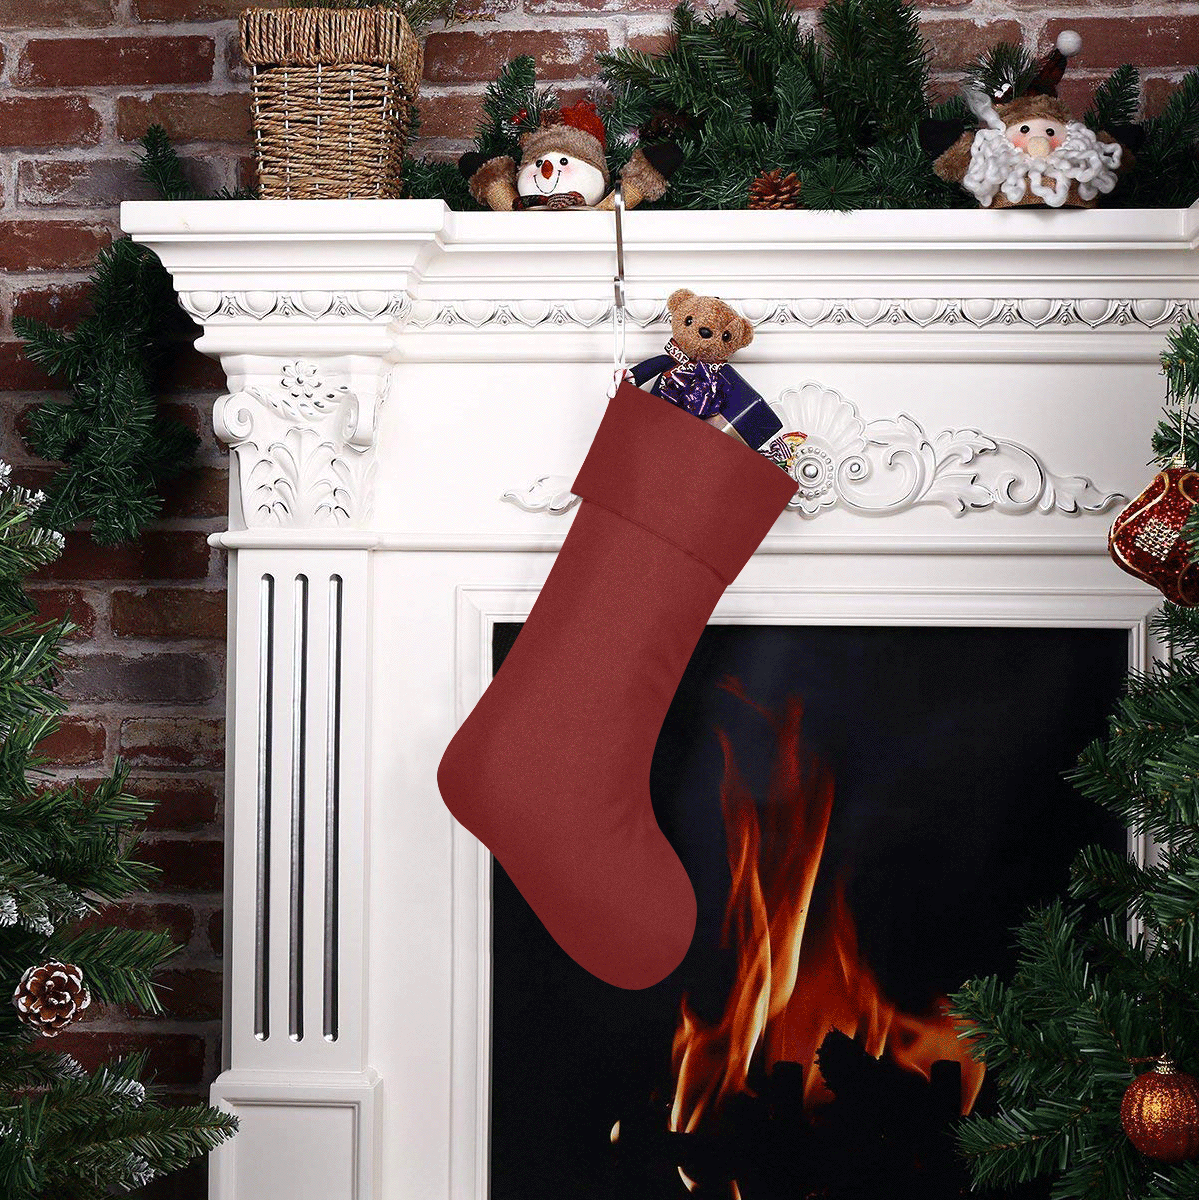 color blood red Christmas Stocking